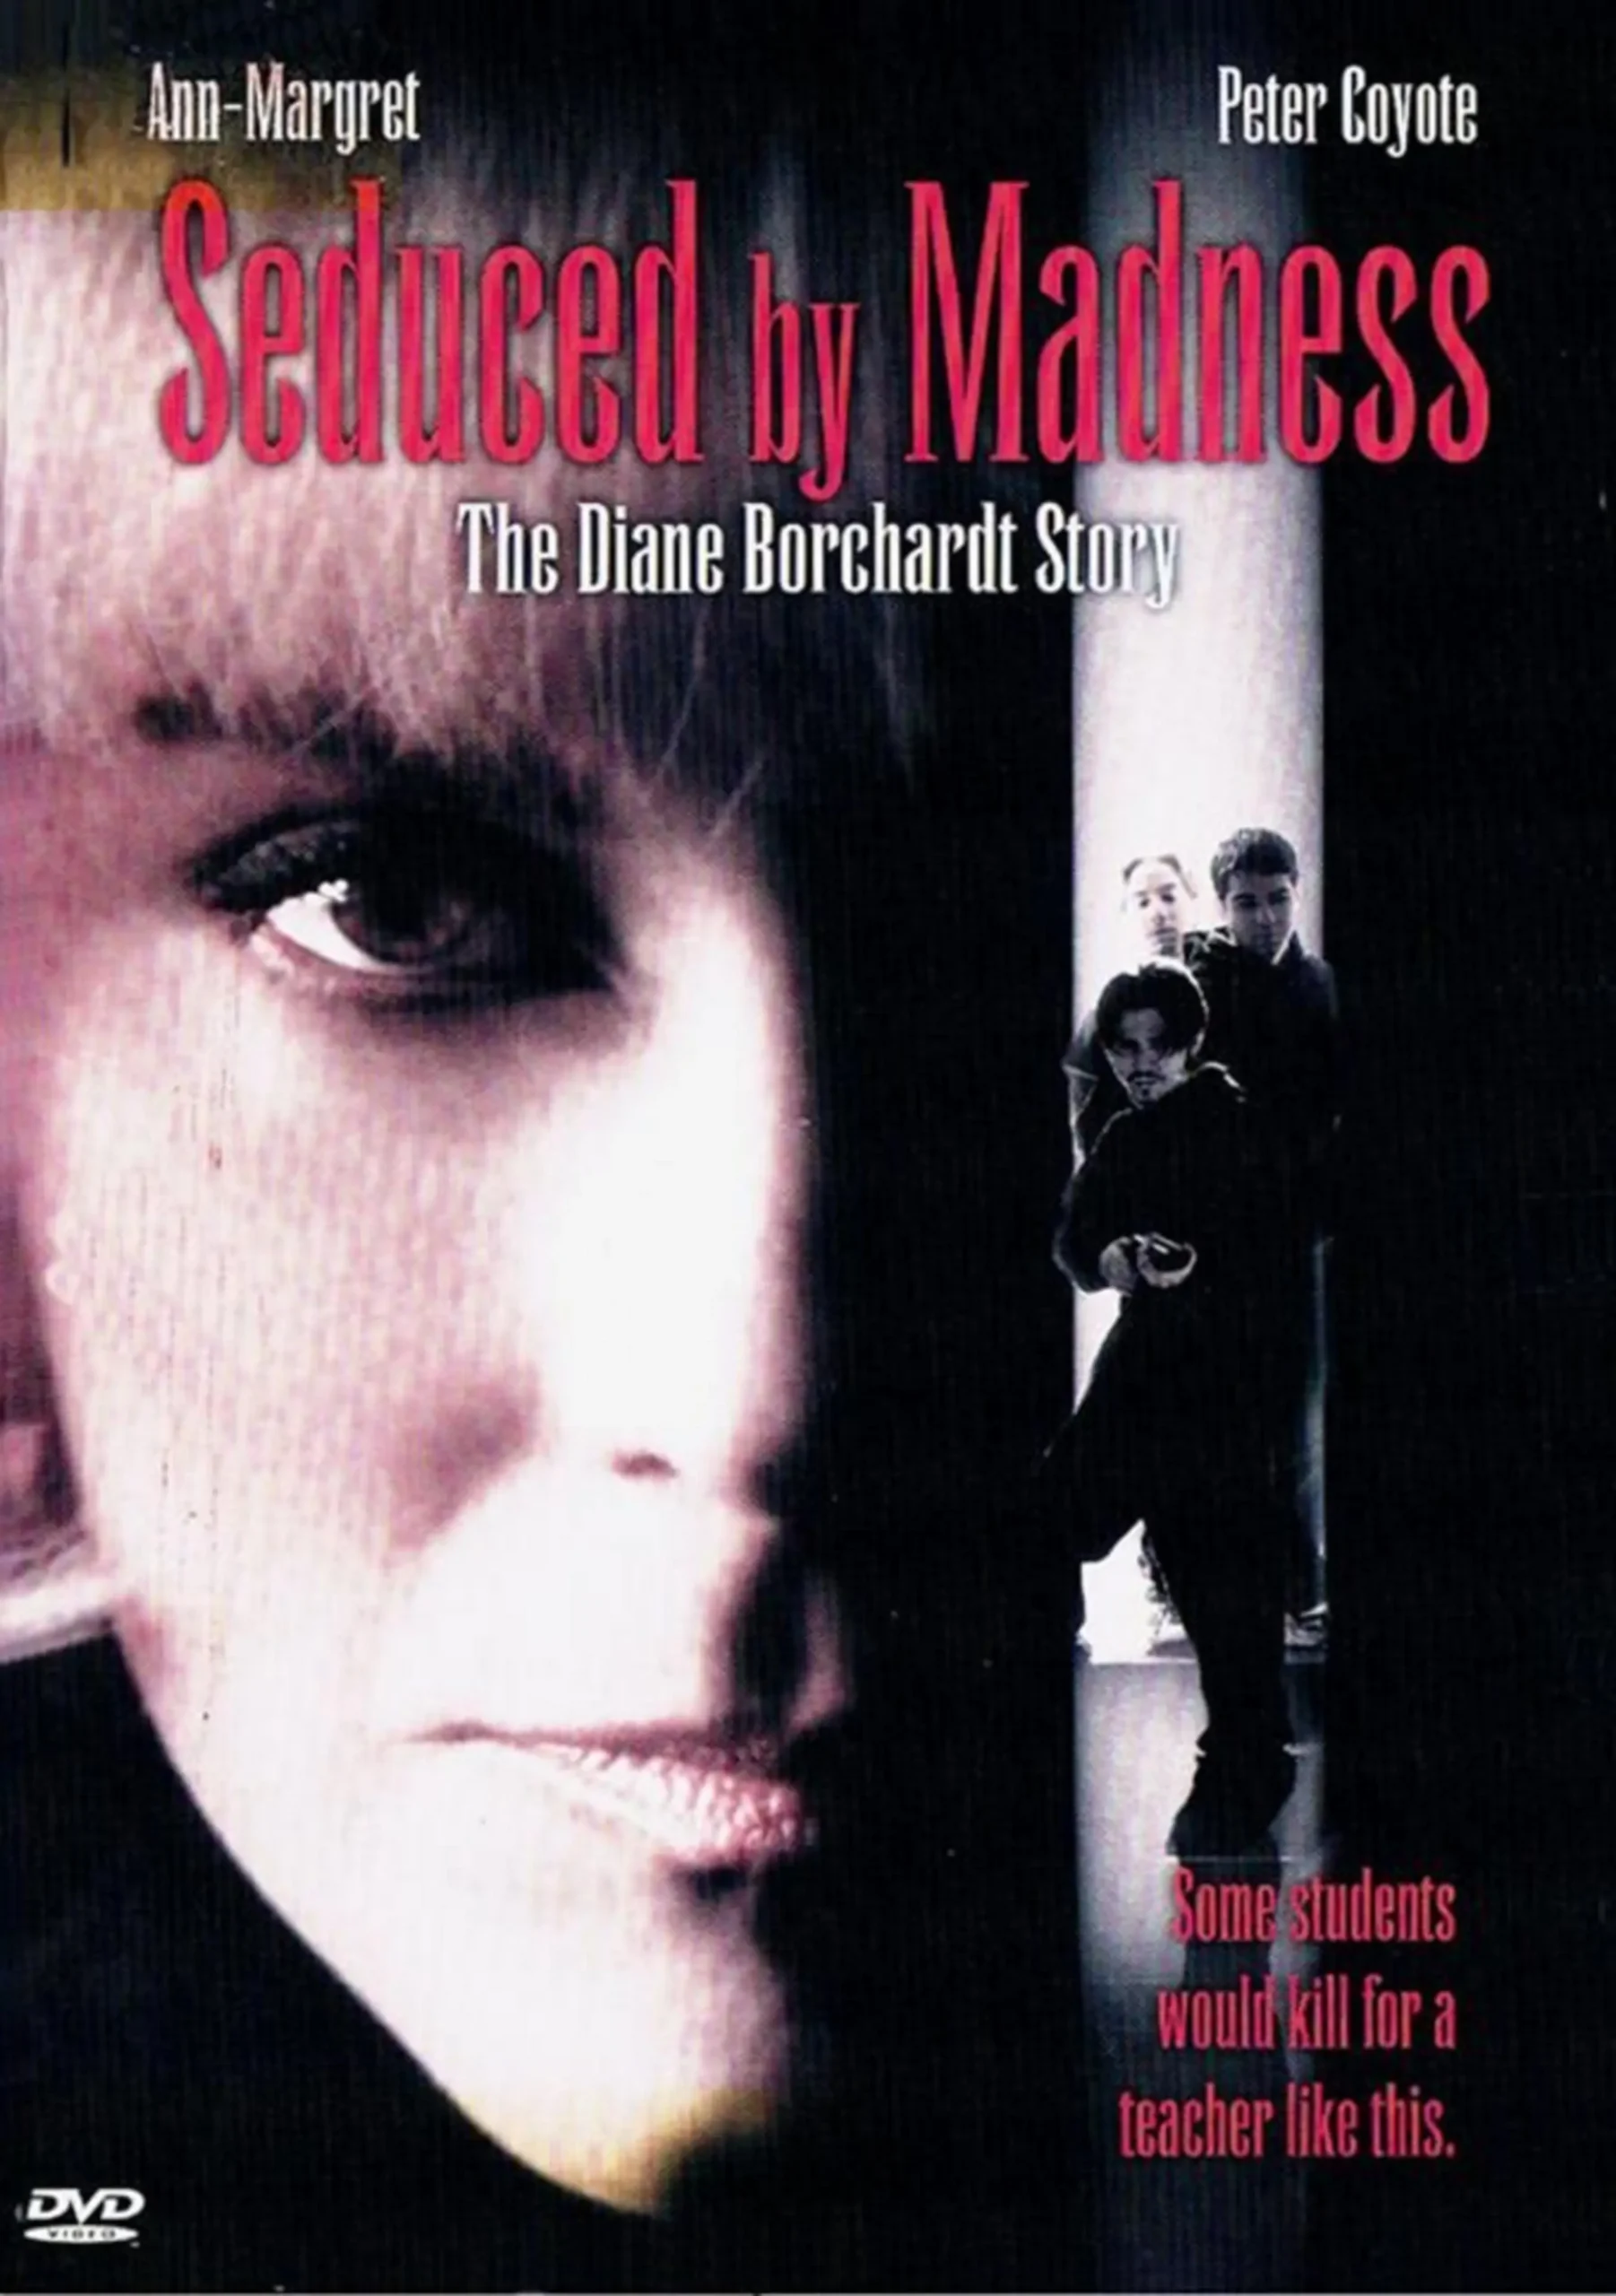 Seduced by Madness The Diane Borchardt Story (1996)
